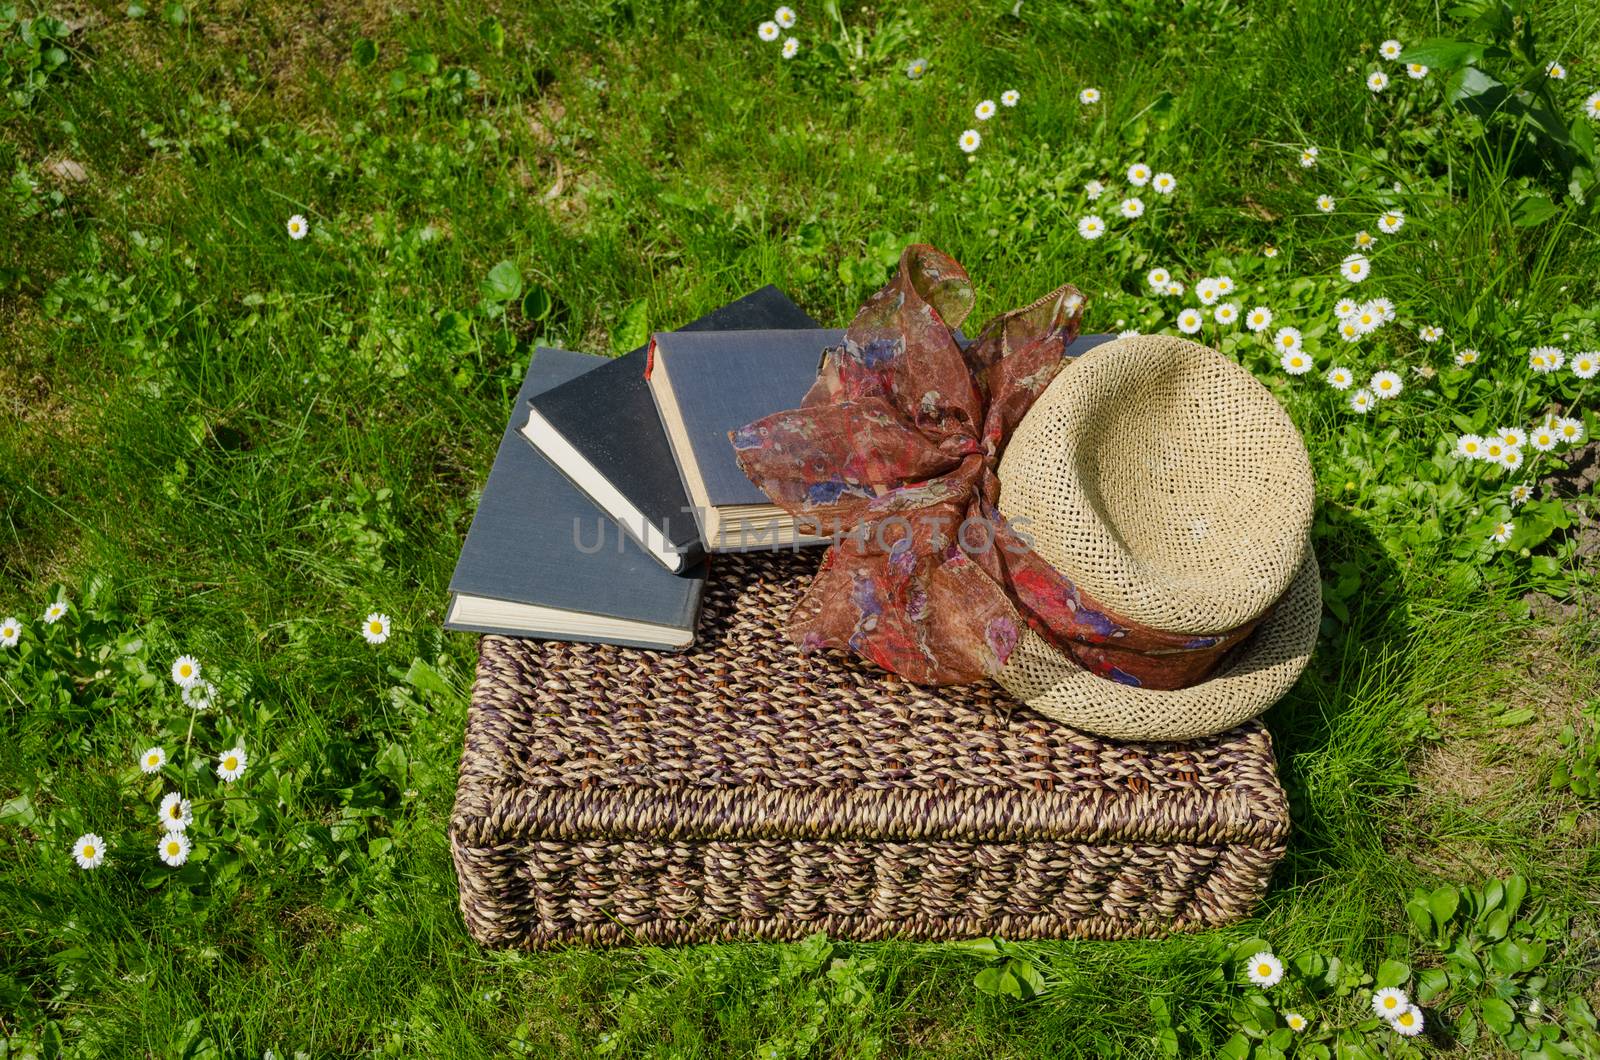 Wicker basket full of books and retro hat on grass by sauletas